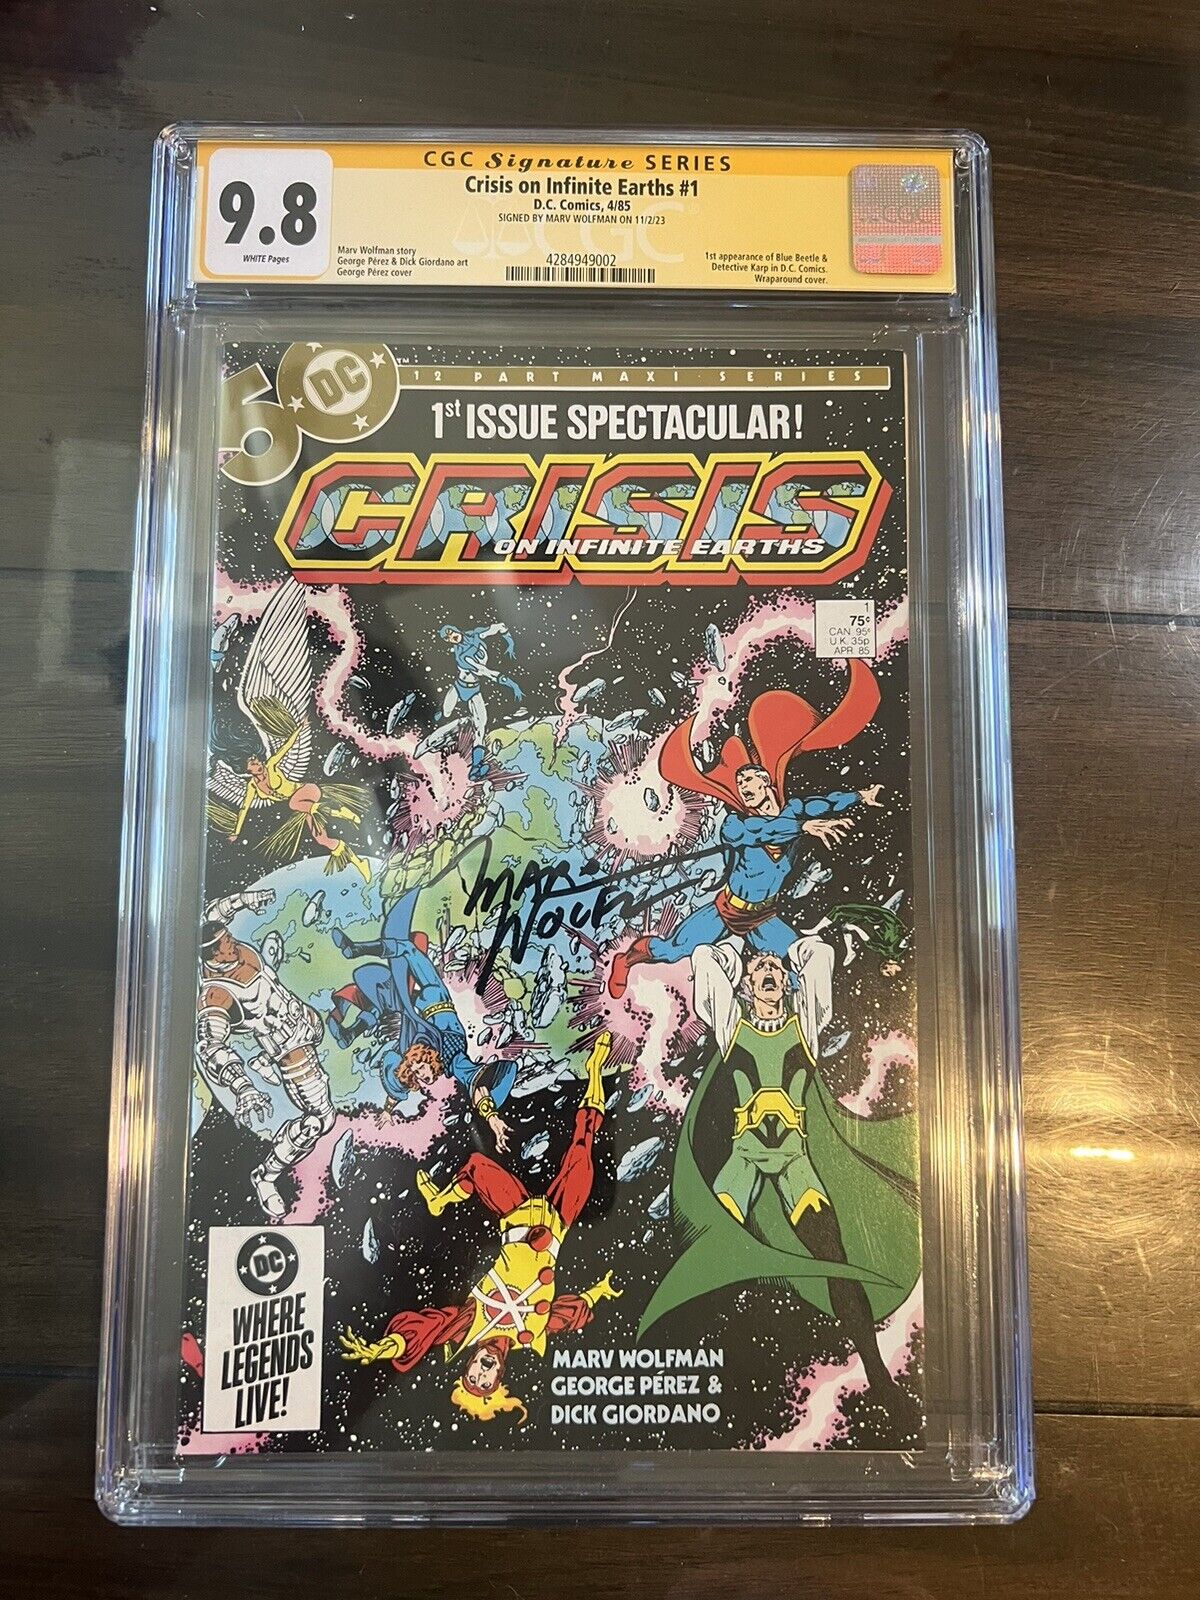 1985 DC Comics CRISIS ON INFINITE EARTHS 1 CGC 9.8 SS Signed by Marv Wolfman